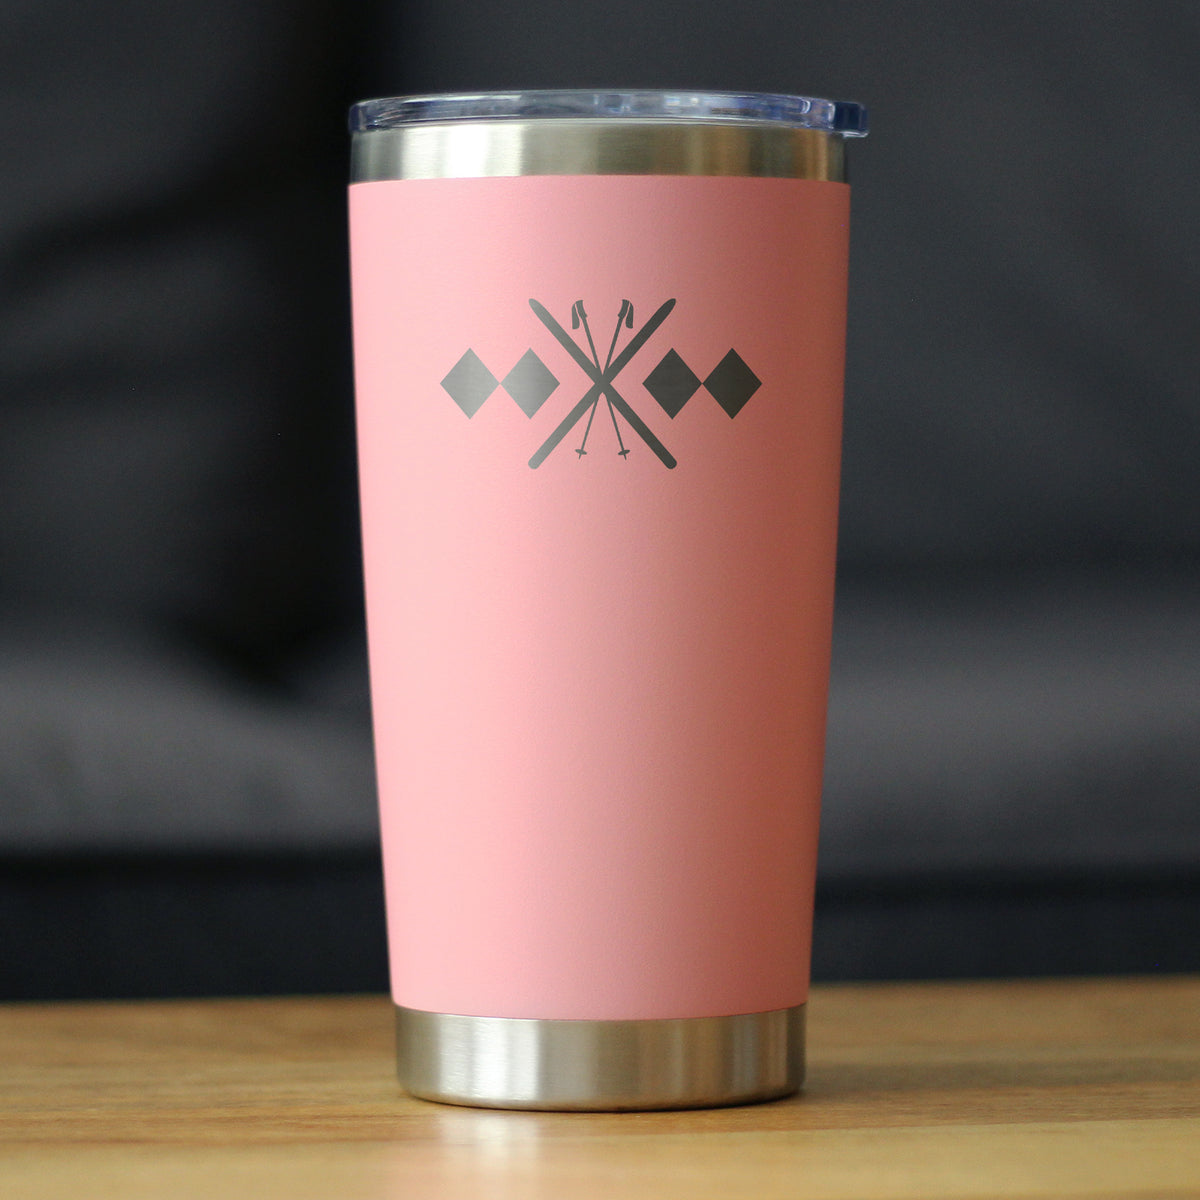 Double Black Diamond - Insulated Coffee Tumbler Cup with Sliding Lid - Stainless Steel Travel Mug - Fun Skiing Gifts and Decor for Skiers